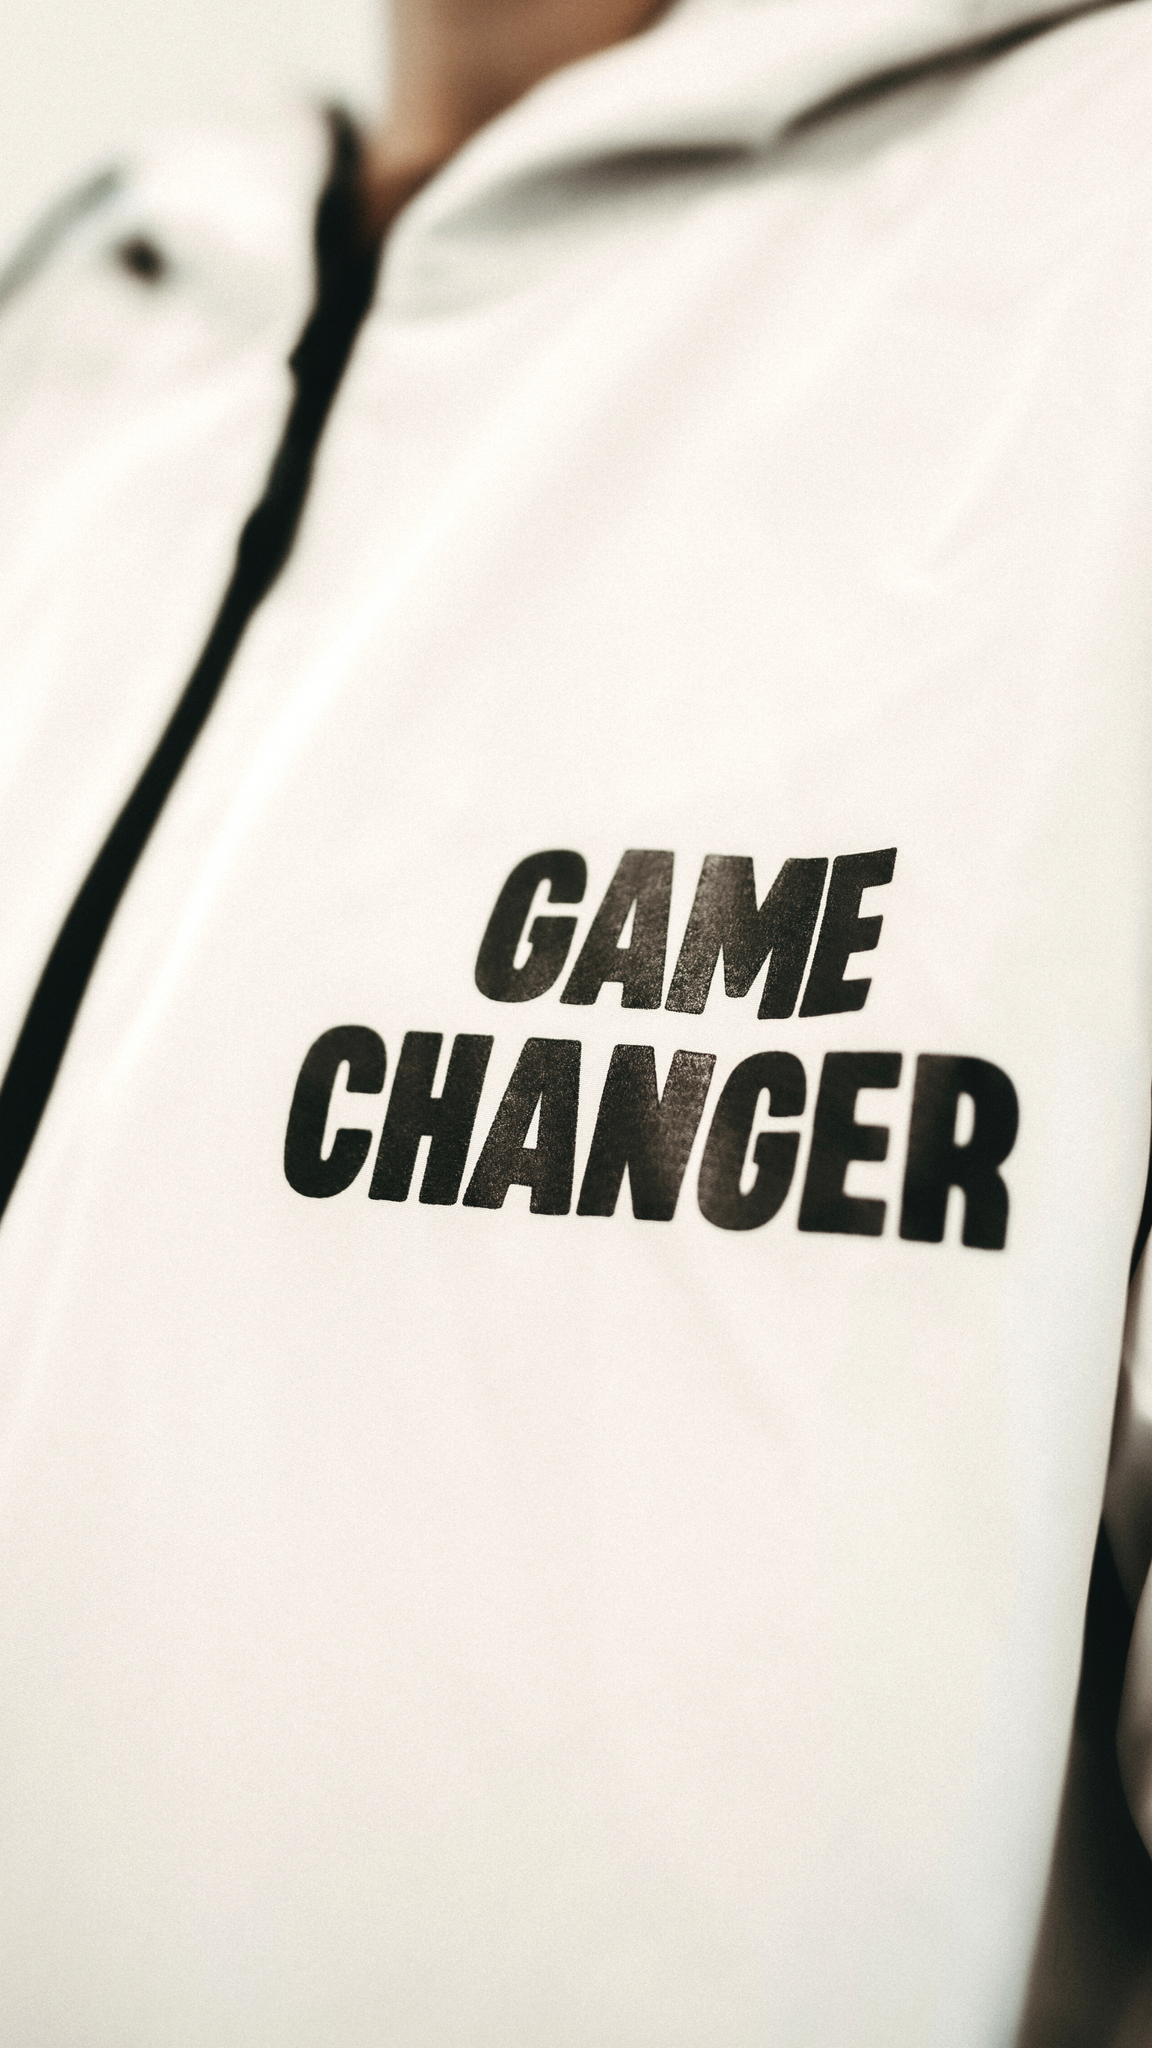 Game Changer Windbreaker - Increase Marketplace Powered by Imperial Distr. Co., Inc.